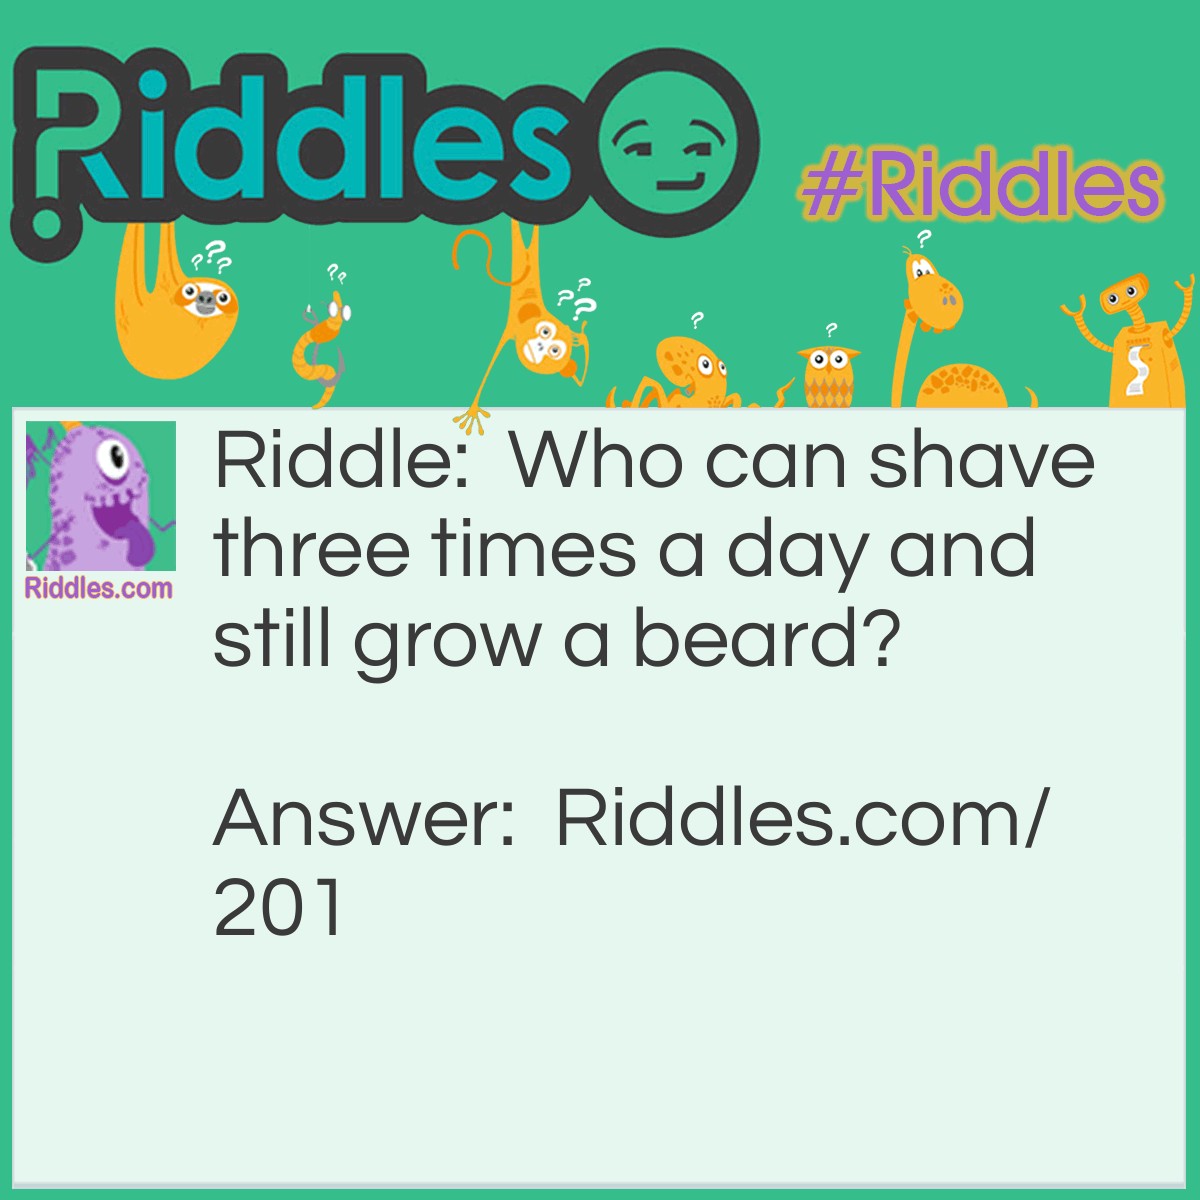 Riddle: Who can shave three times a day and still grow a beard? Answer: A barber. He could shave other men three times a day and still grow his own beard.